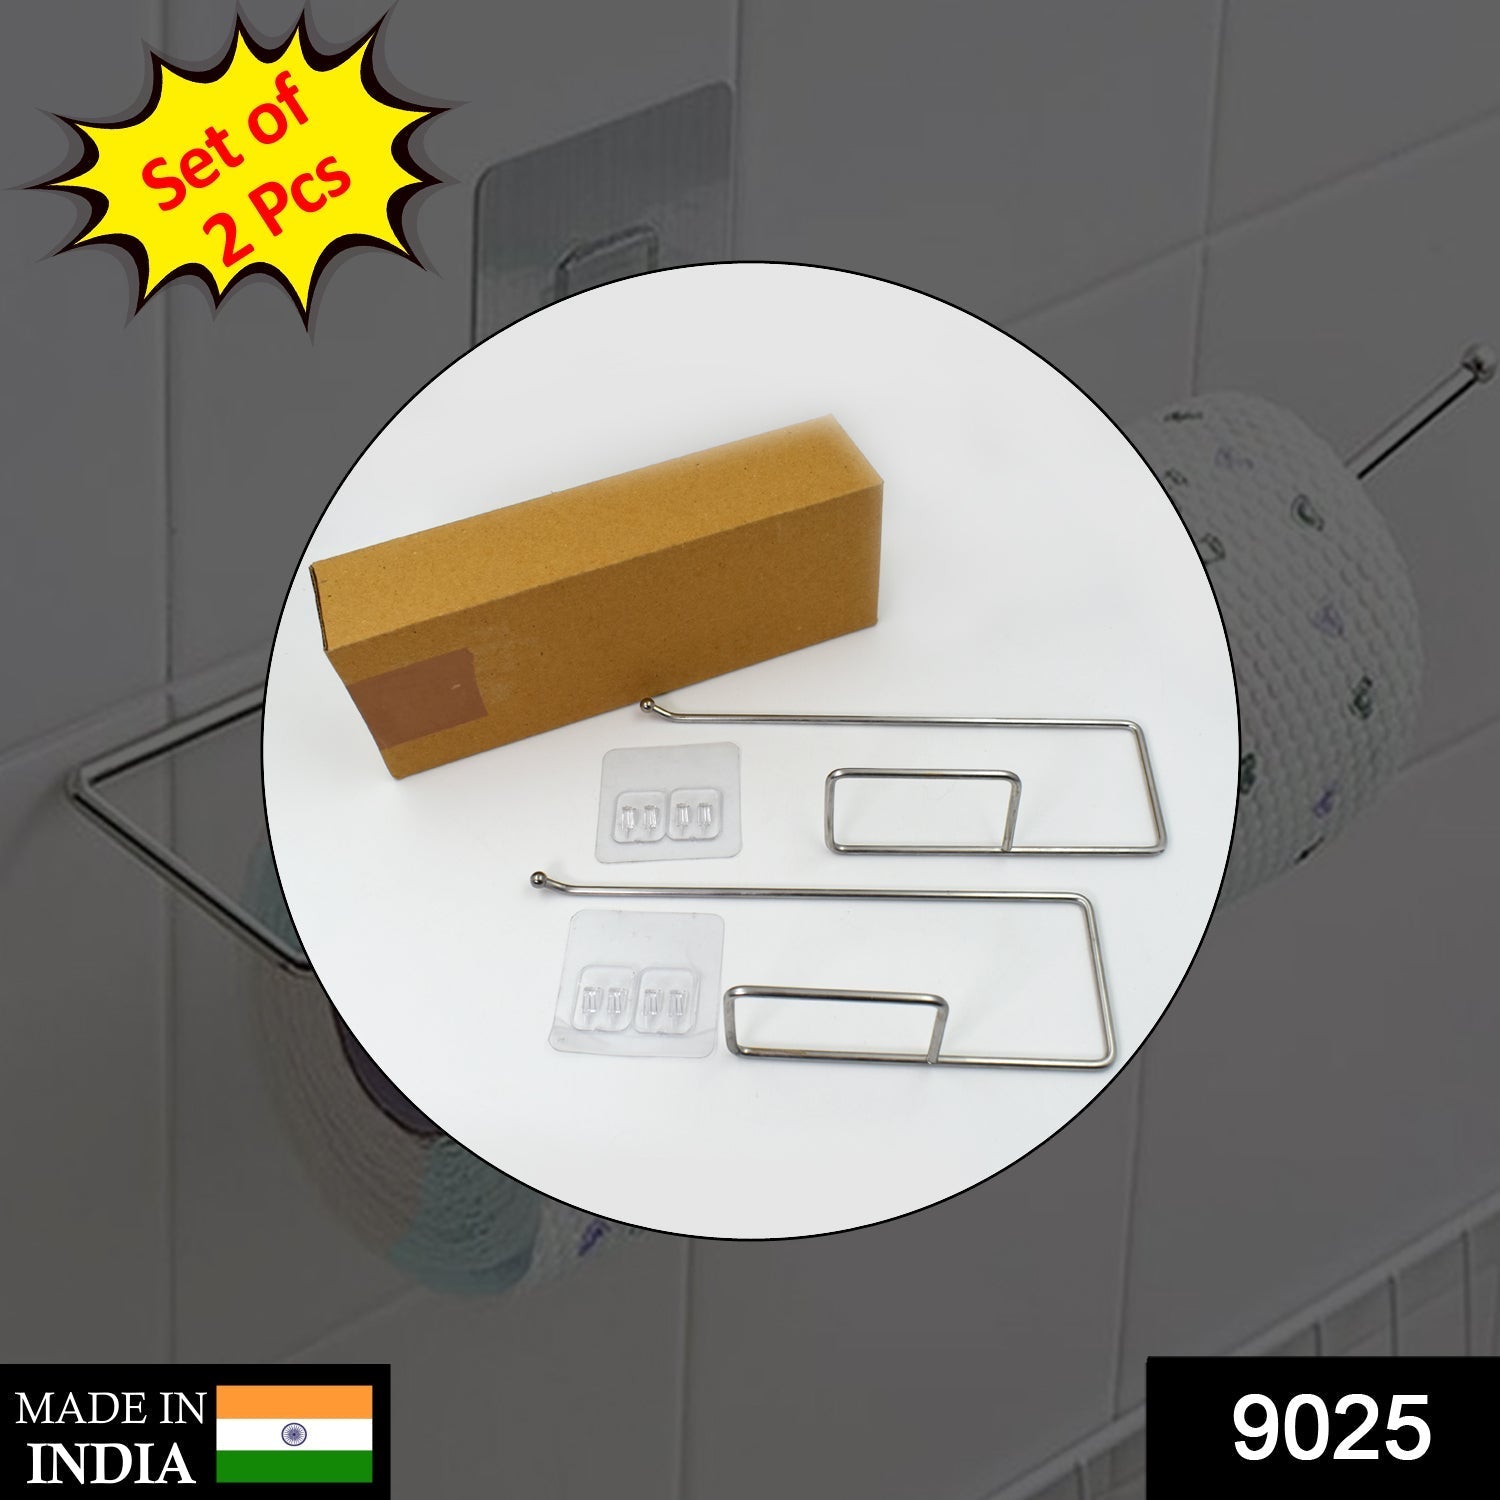 9025 2 Pc Bath Tissue Holder used in all kinds of household and official bathroom purposes by all types of people for holding tissue in bathrooms.